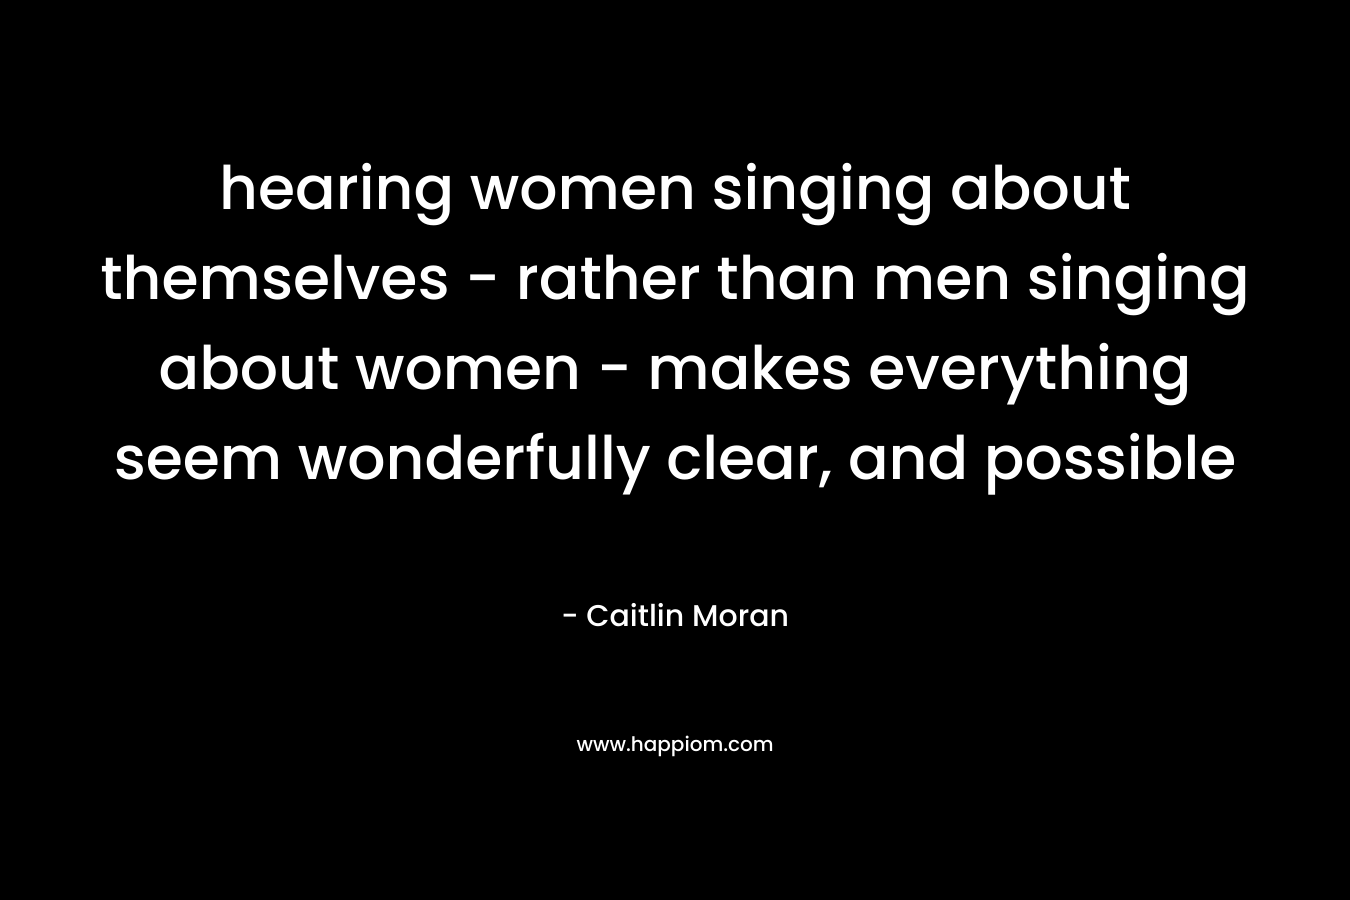 hearing women singing about themselves - rather than men singing about women - makes everything seem wonderfully clear, and possible